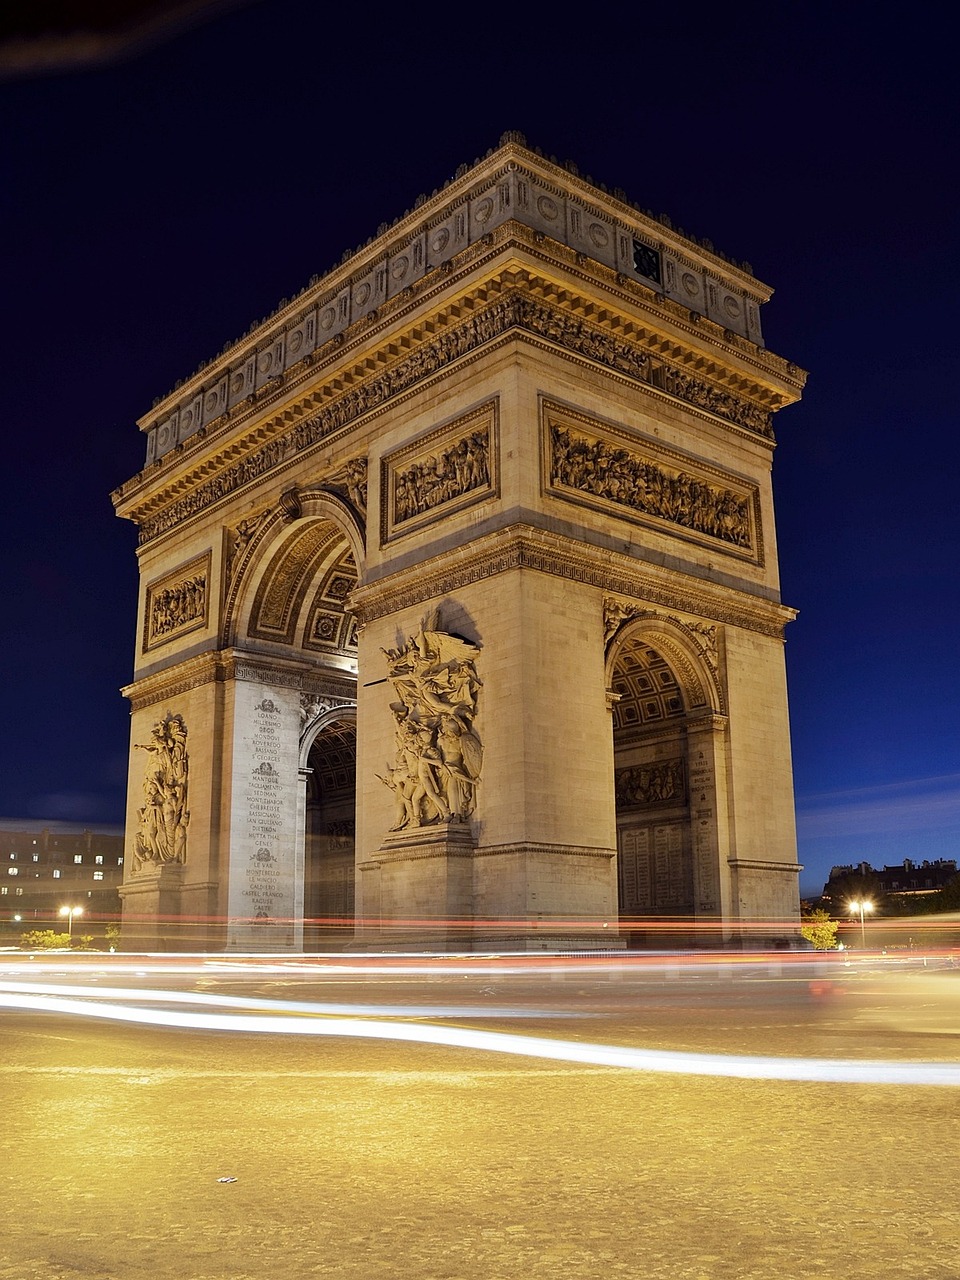 How to Visit the Arc de Triomphe (Tickets & Visiting Tips)